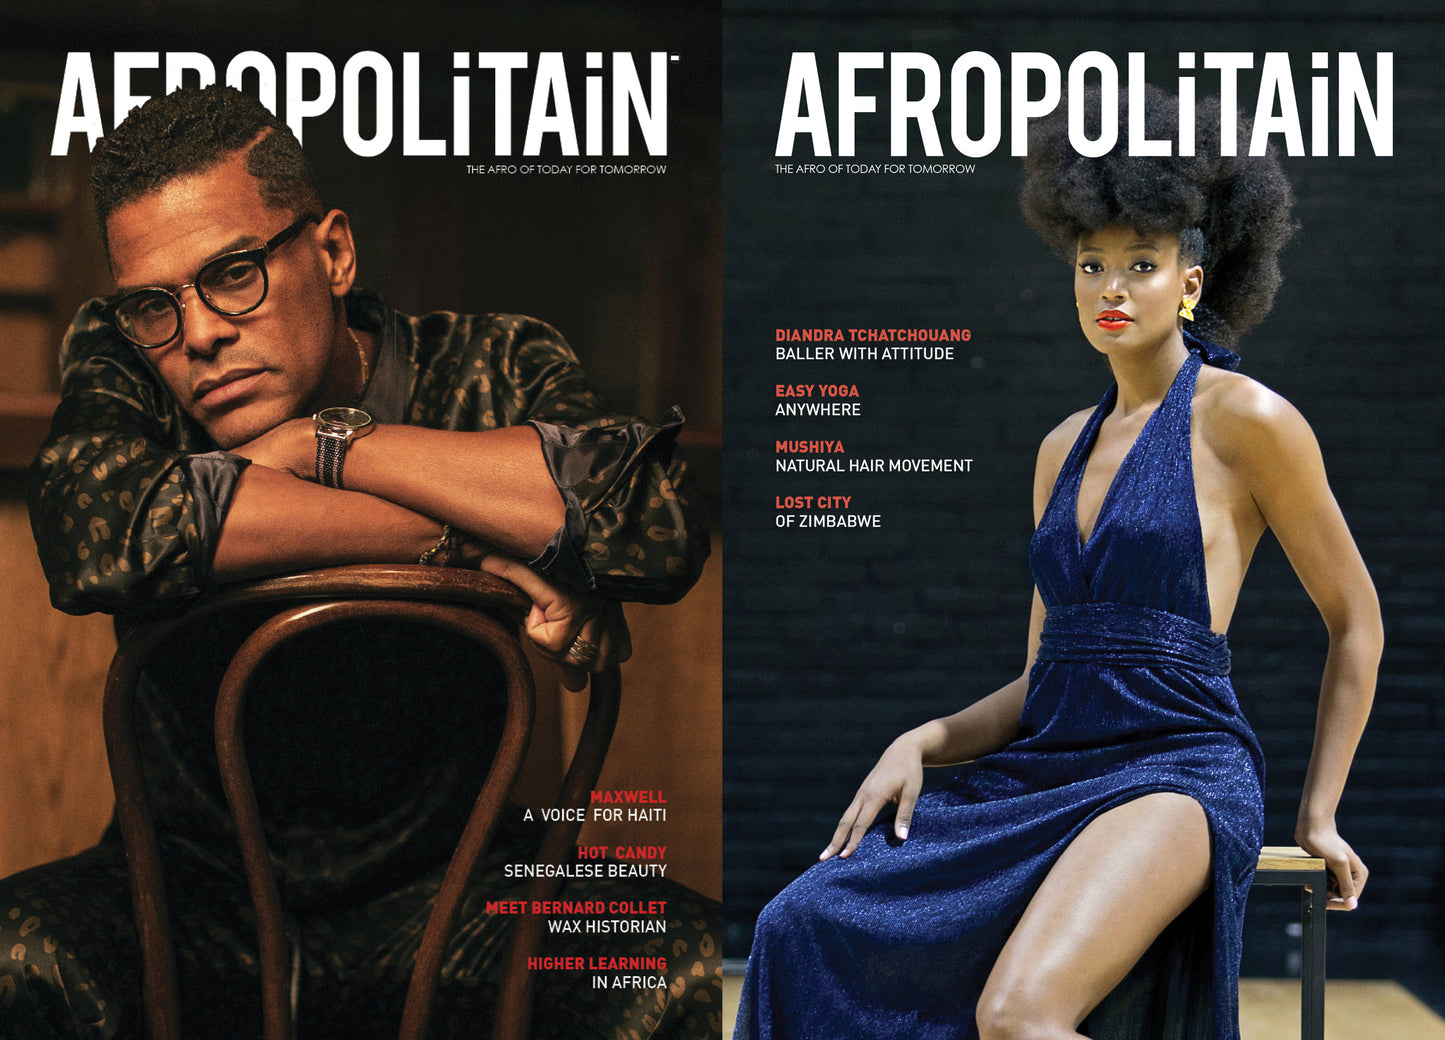 AFROPOLiTAiN Magazine - Issue 4 - Maxwell and Diandra Tchatchouang